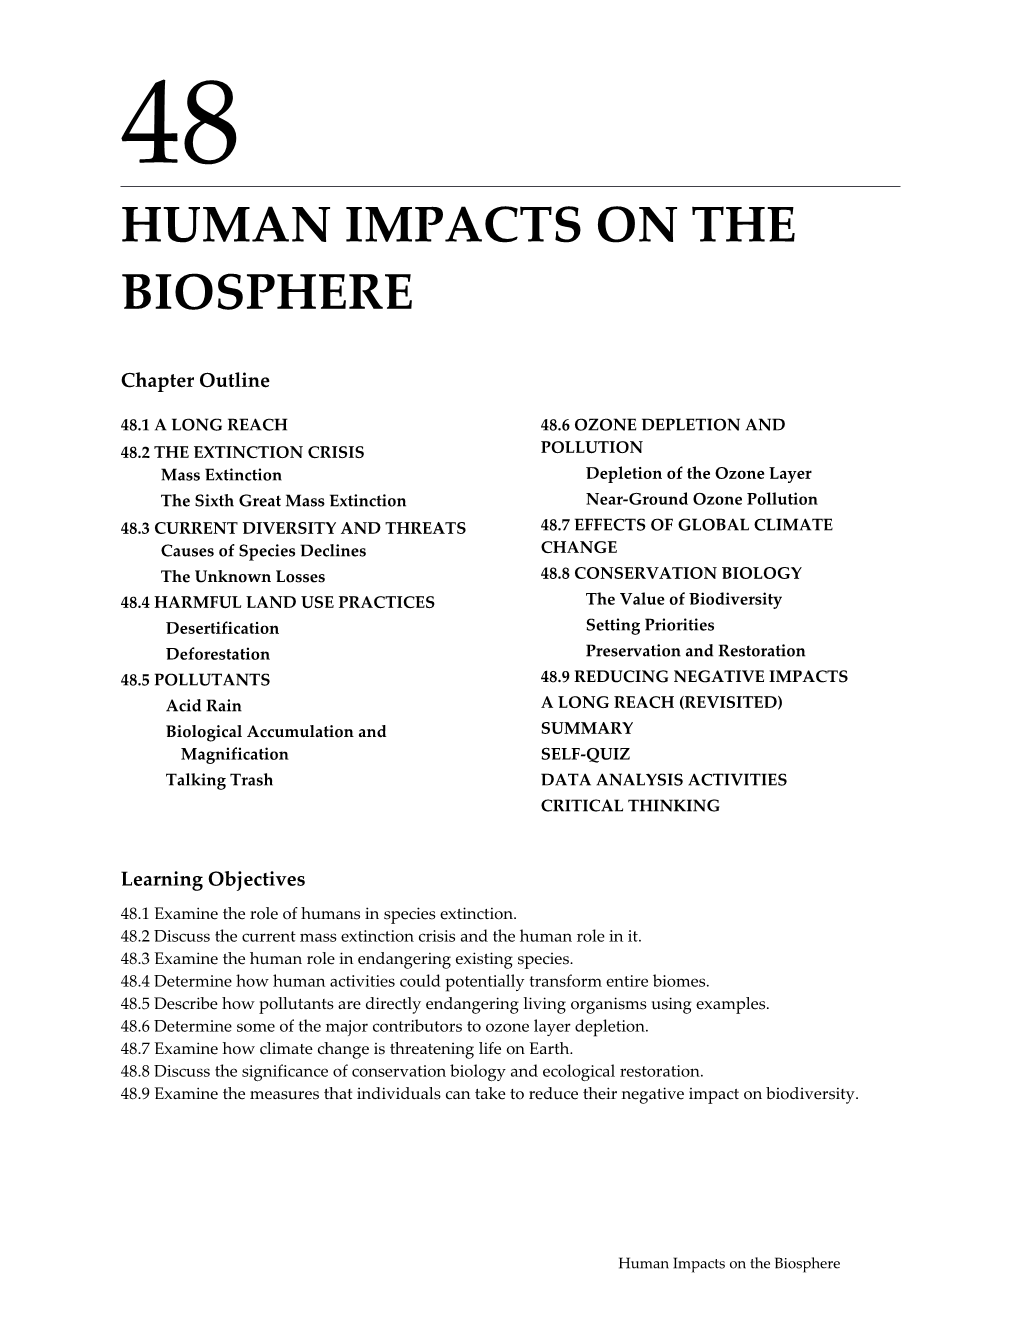 49 Human Impacts on the Biosphere